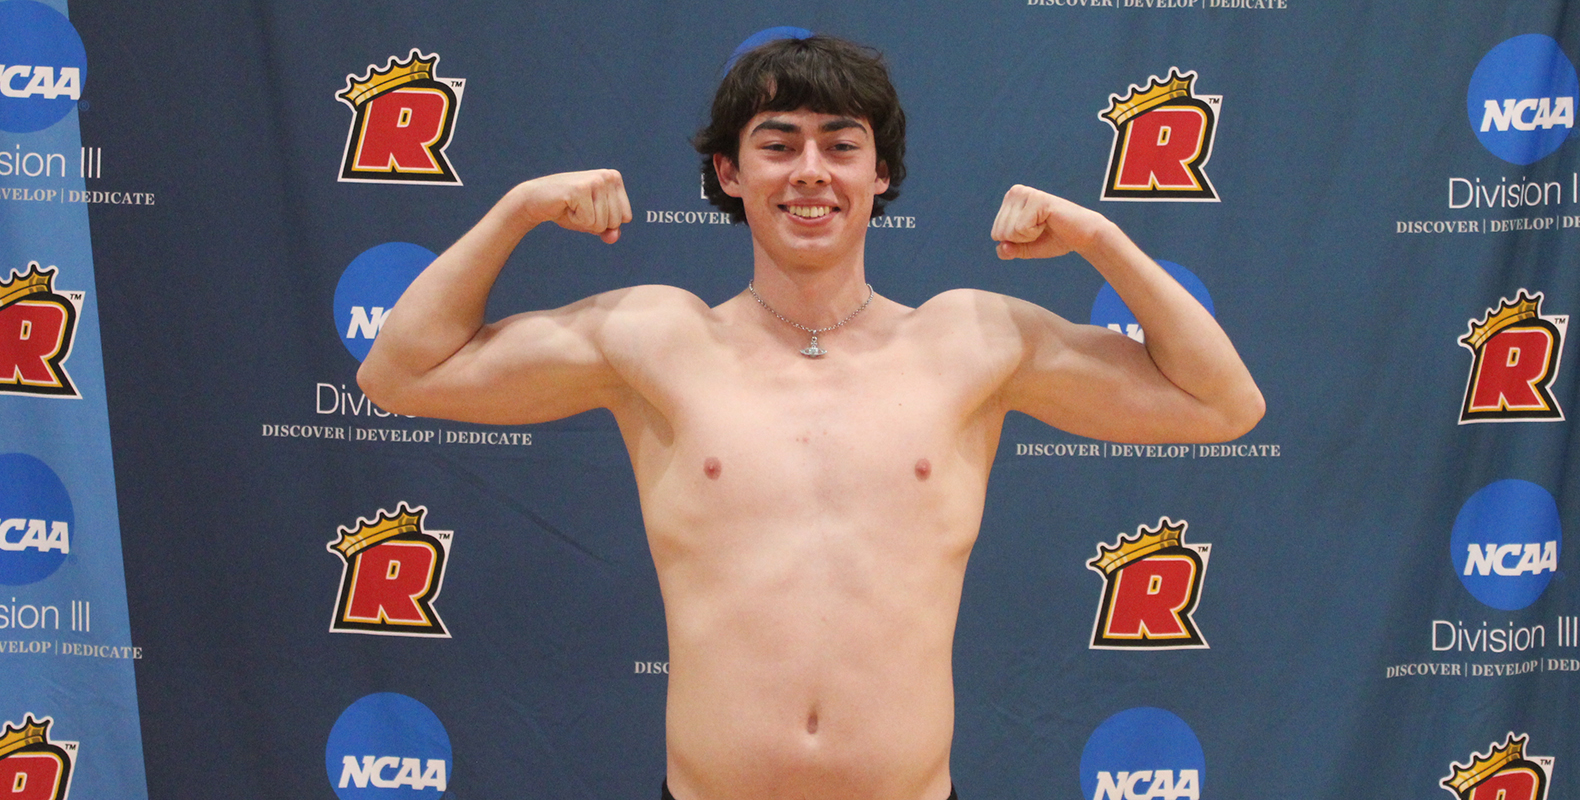 School Records Lead to Victory for Men’s Swim and Dive Team